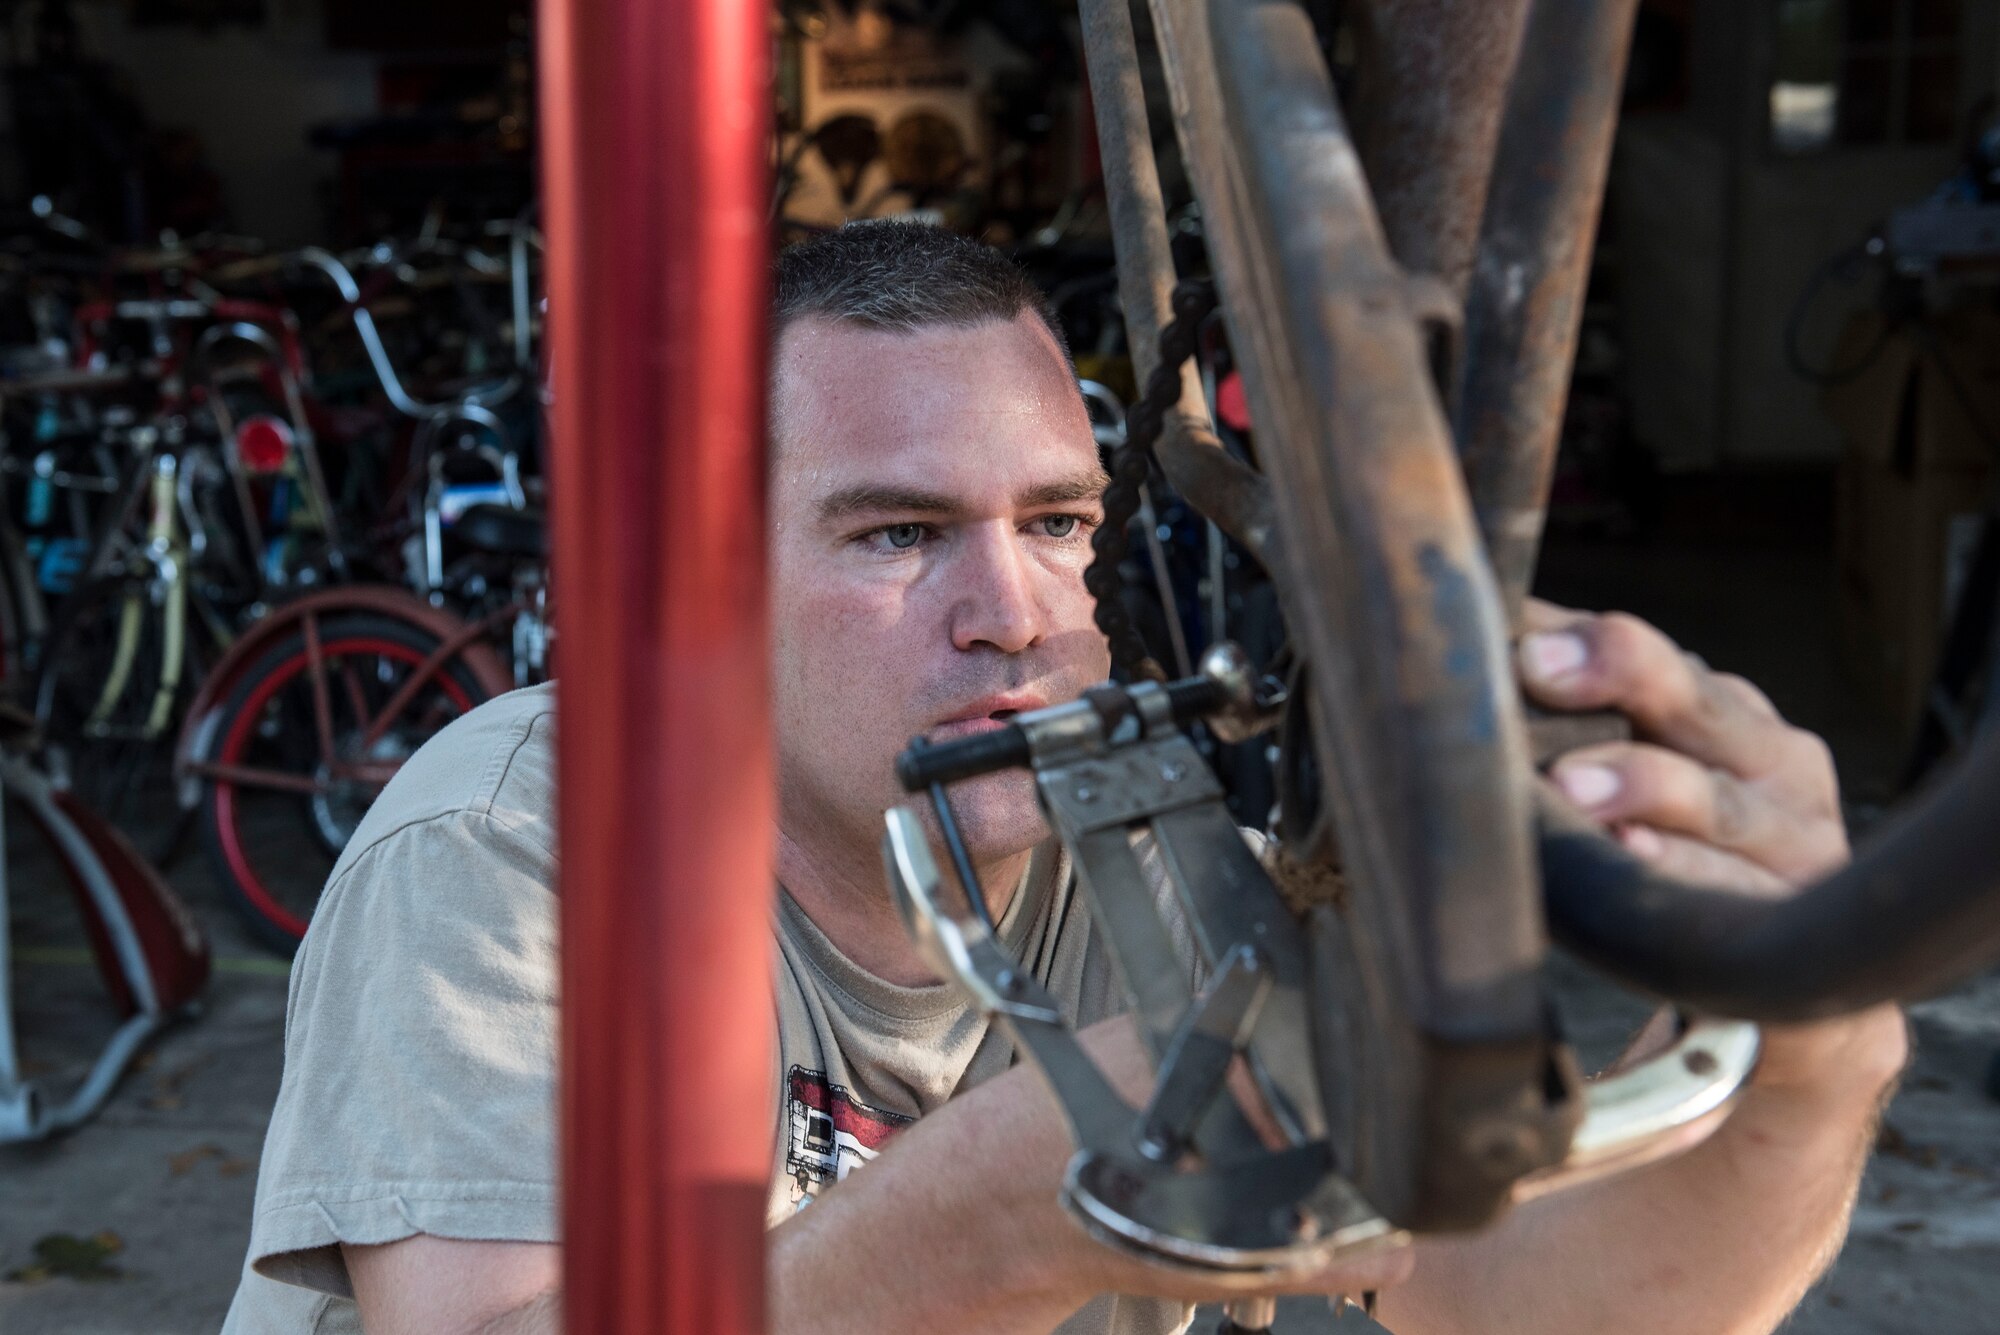 U.S. Air Force Staff Sgt. Patrick Lewis, 20th Equipment Maintenance Squadron aircraft structural maintenance mechanic, works on a bicycle at his home in Sumter, S.C., Sept. 10, 2018.